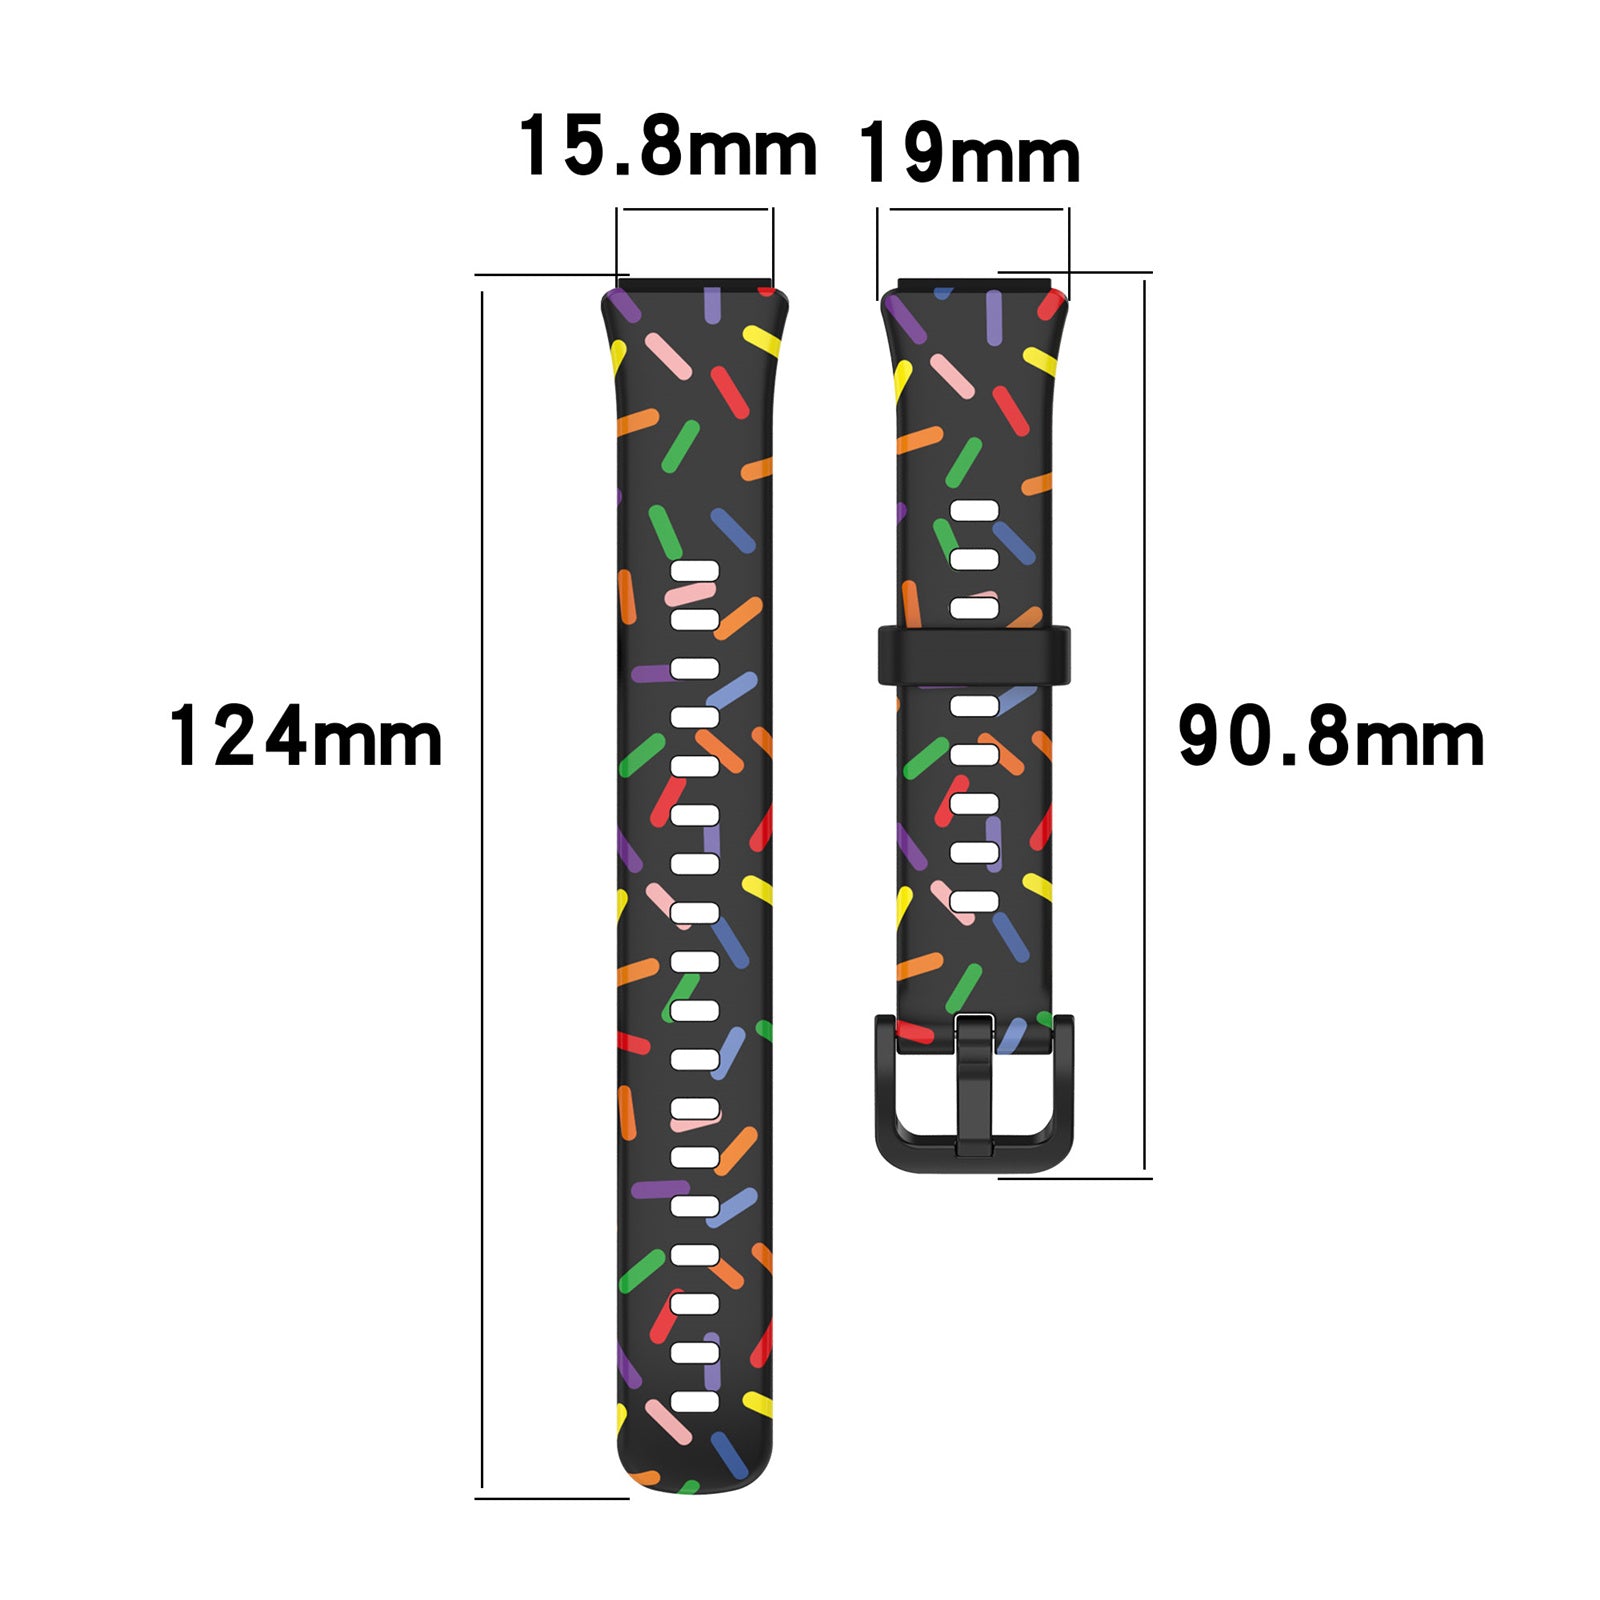 Uniqkart for Huawei Band 7 Colorful Spotted Wrist Band Replacement Silicone Watch Strap - Purple